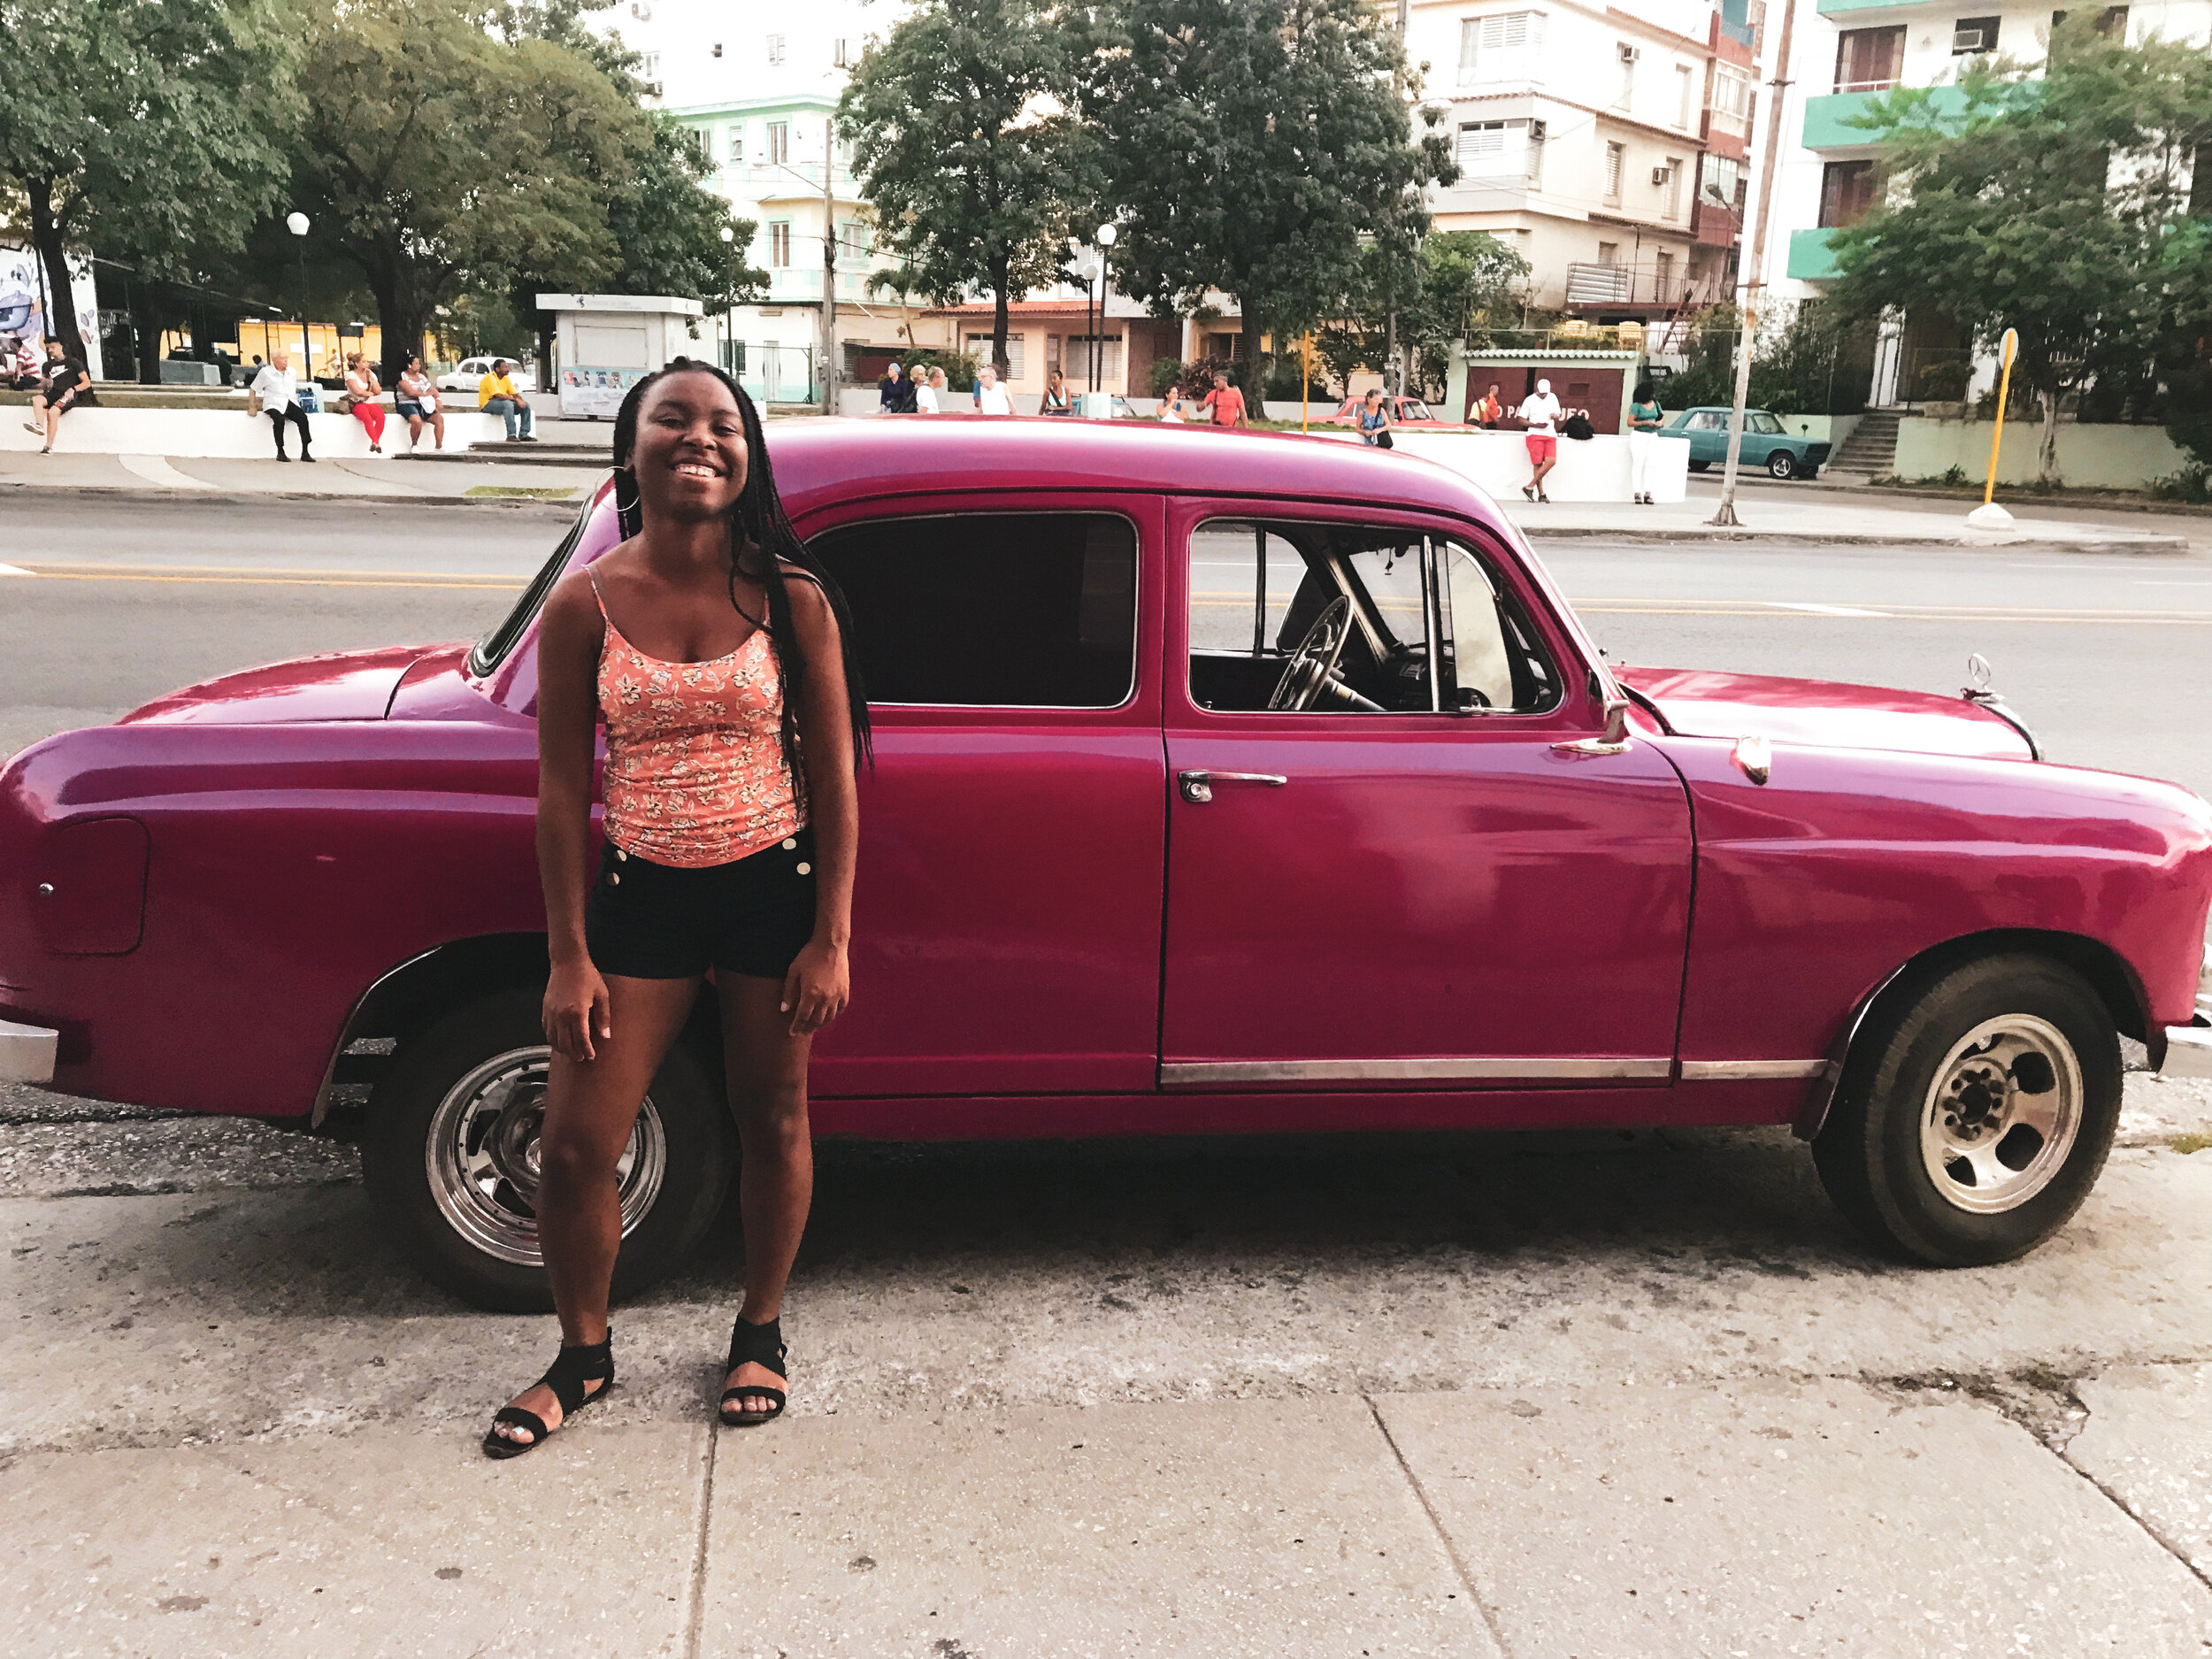 Havana, Cuba; November 2019 - Time traveling with my mom in a place she once called home